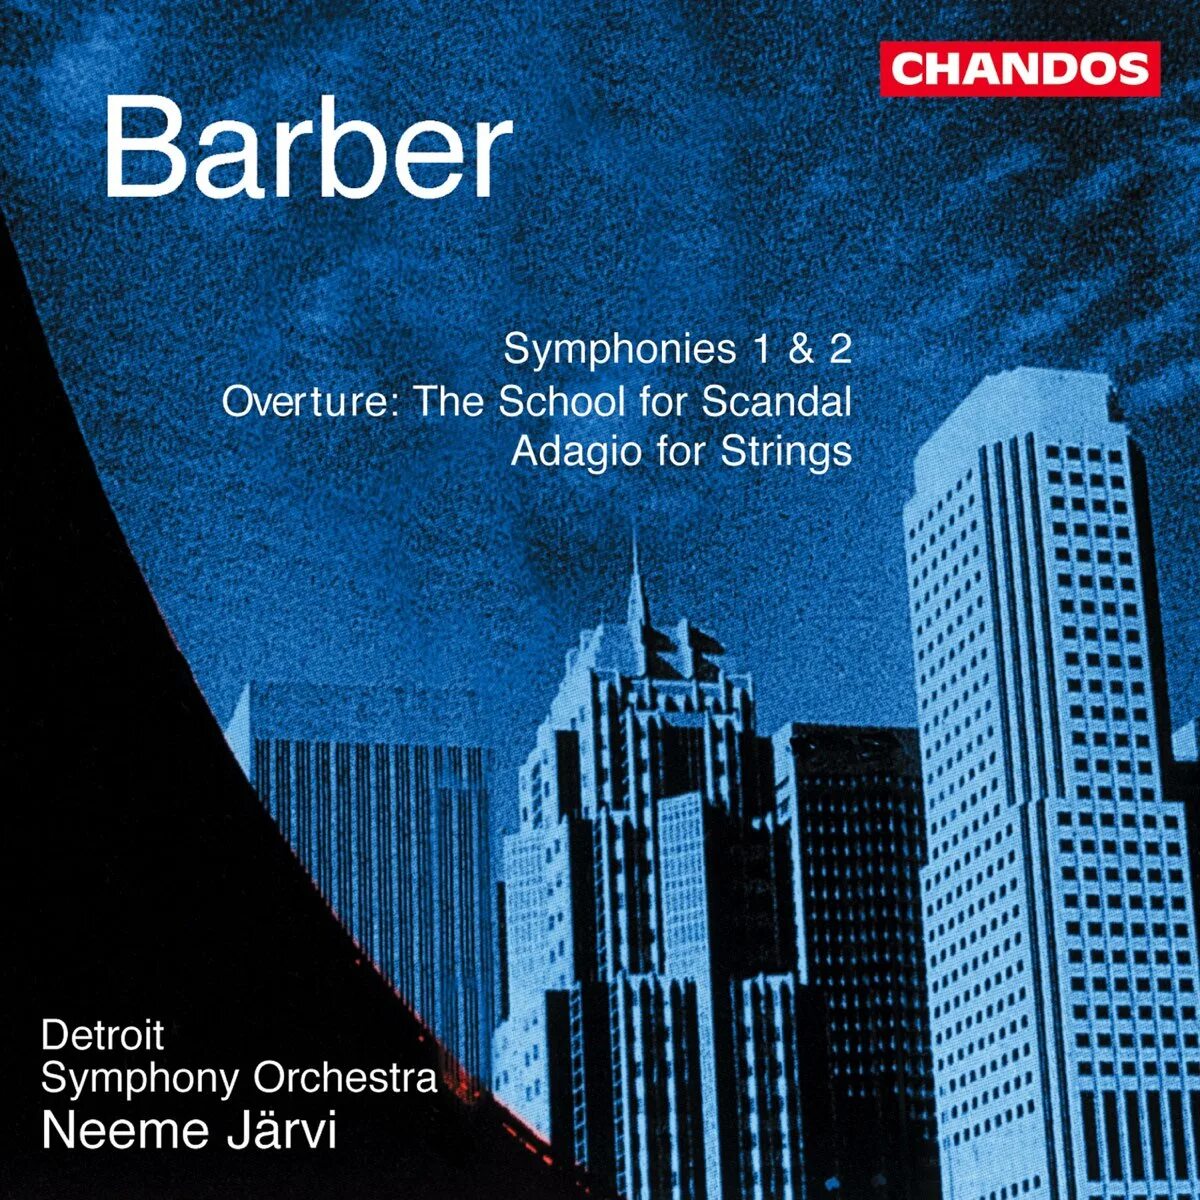 Barber adagio. Samuel Barber. Adagio for Strings, op. 11 Samuel Barber. Samuel Barber CD Sony. Barber, Samuel - Symphonies nos 1 & 2 - essay for Orchestra - Overture to the School for scandal.